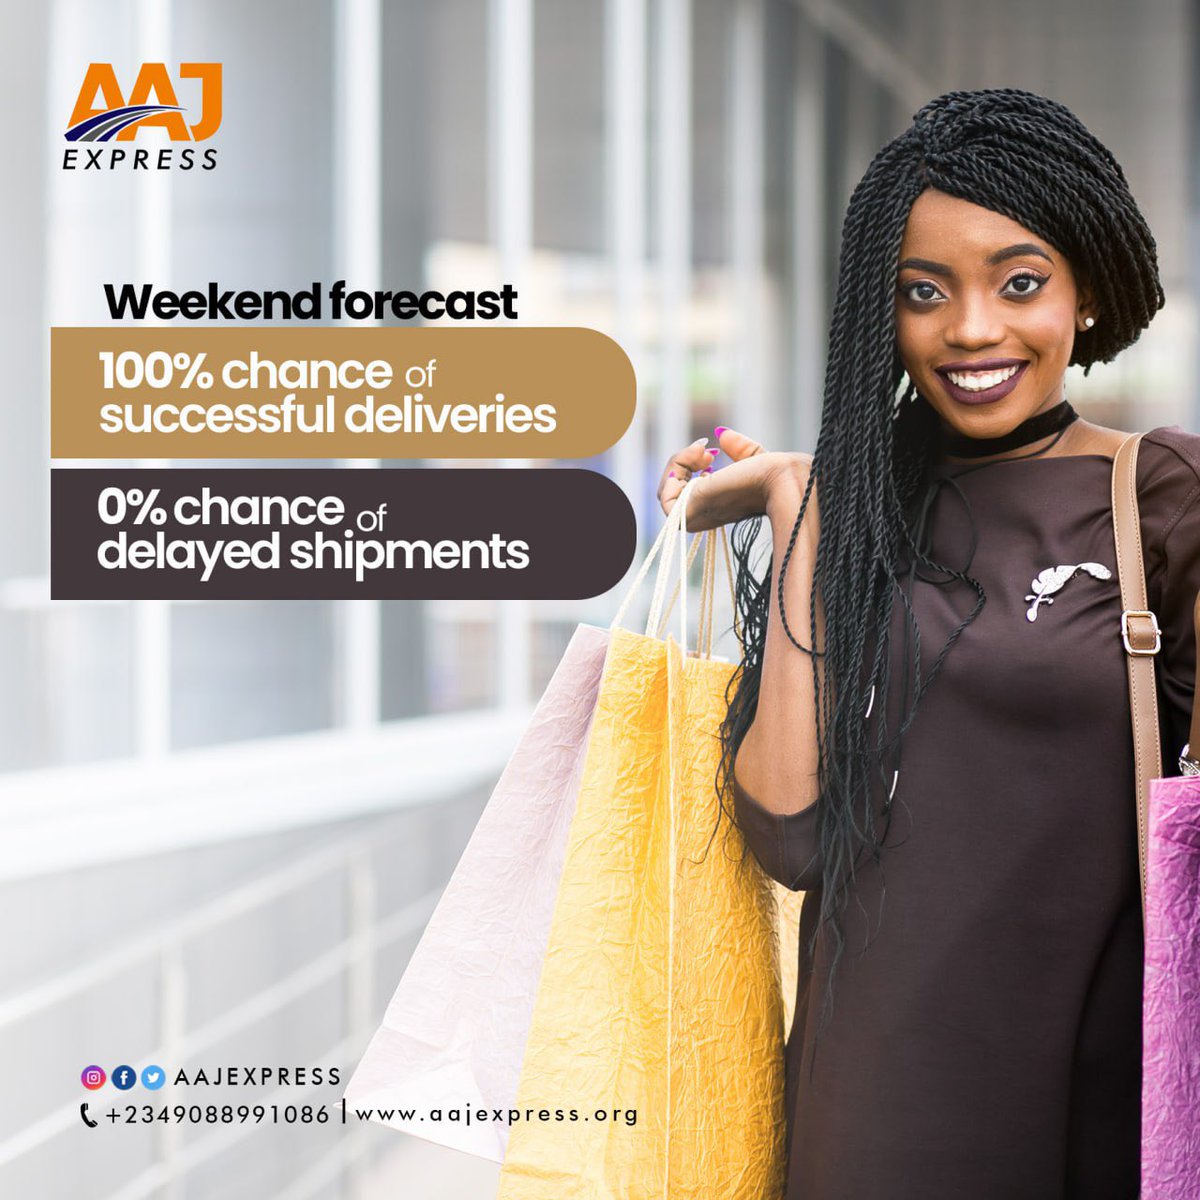 Keep this in mind as we go into the weekend. We are 100% for you. 

#logistics #logisticscompany #logisticscargo #logisticsserveces #Logisticservice #Logisticsinlagos #logisticsinnigeria #fastdelivery #quickdelivery #deliveryinlagos #courierservice #shipping #shippingandcourier